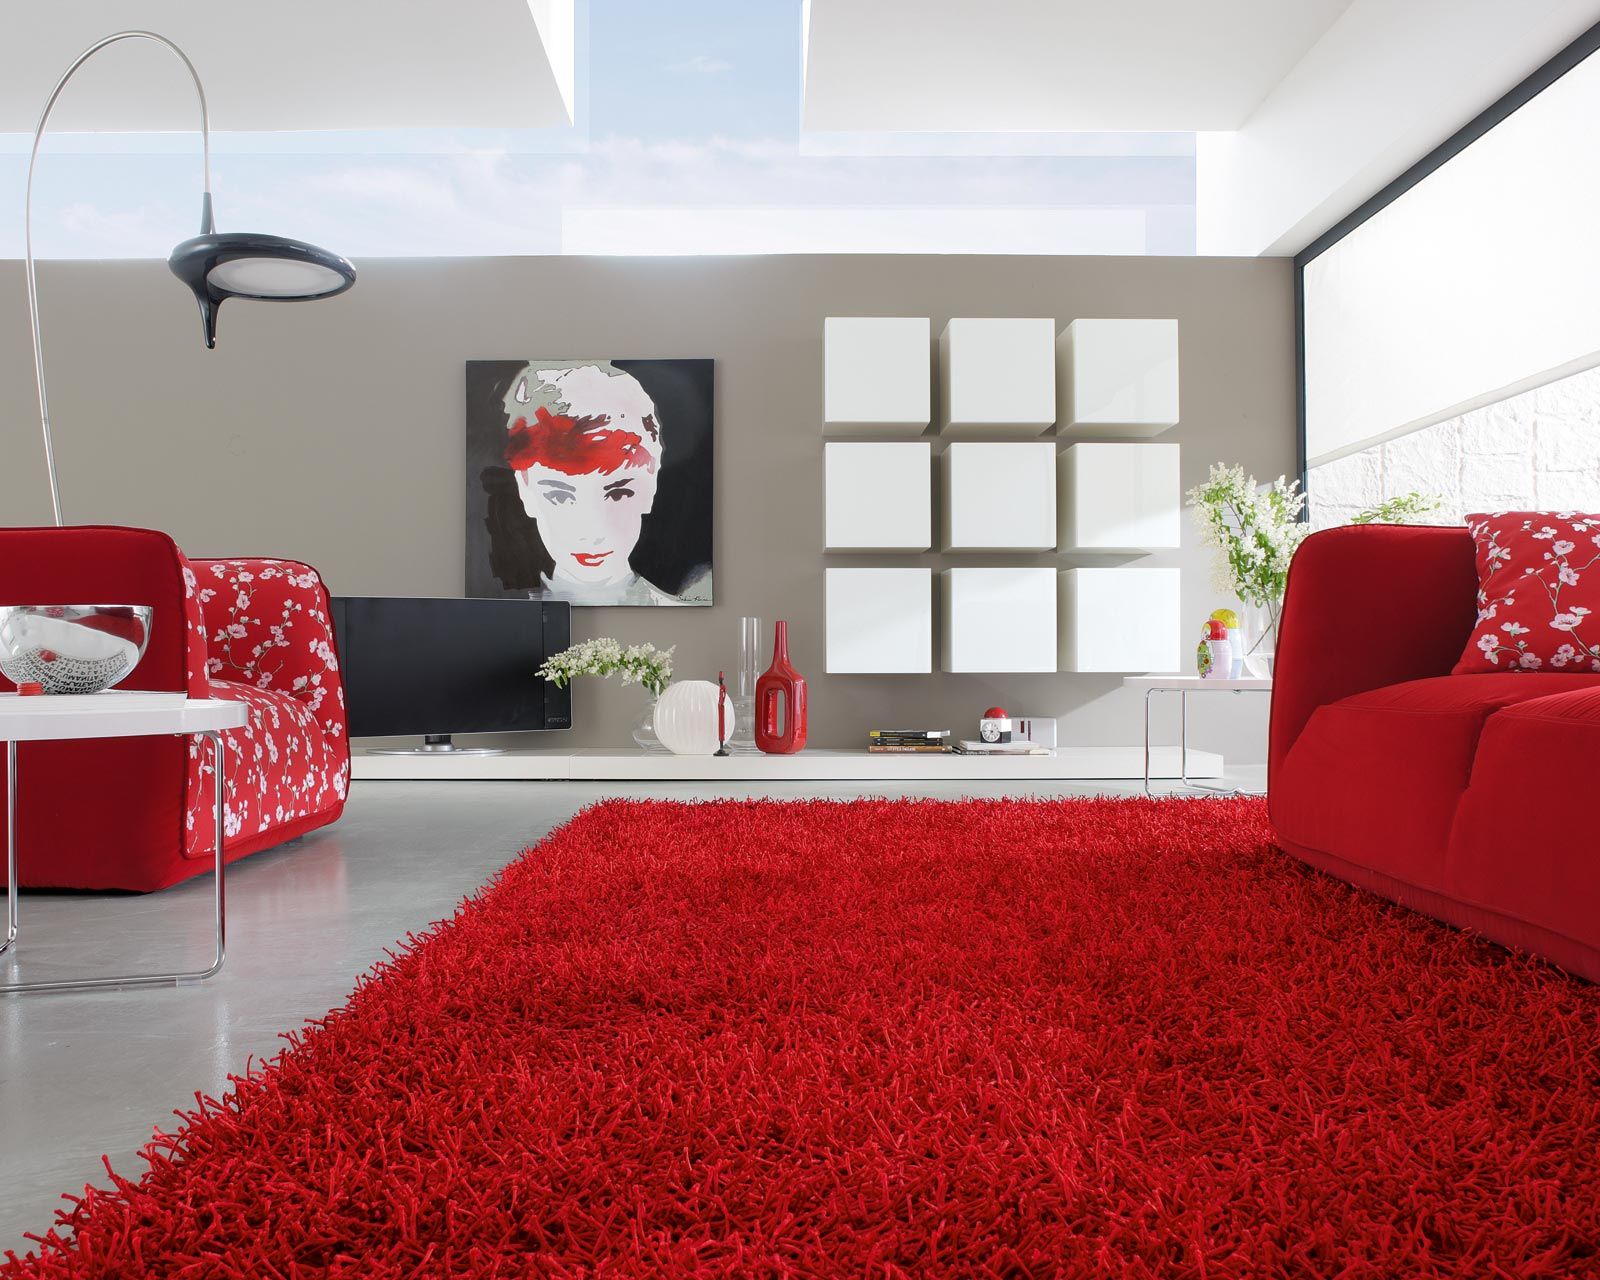 Modern Living Room With Red Persian Rugs